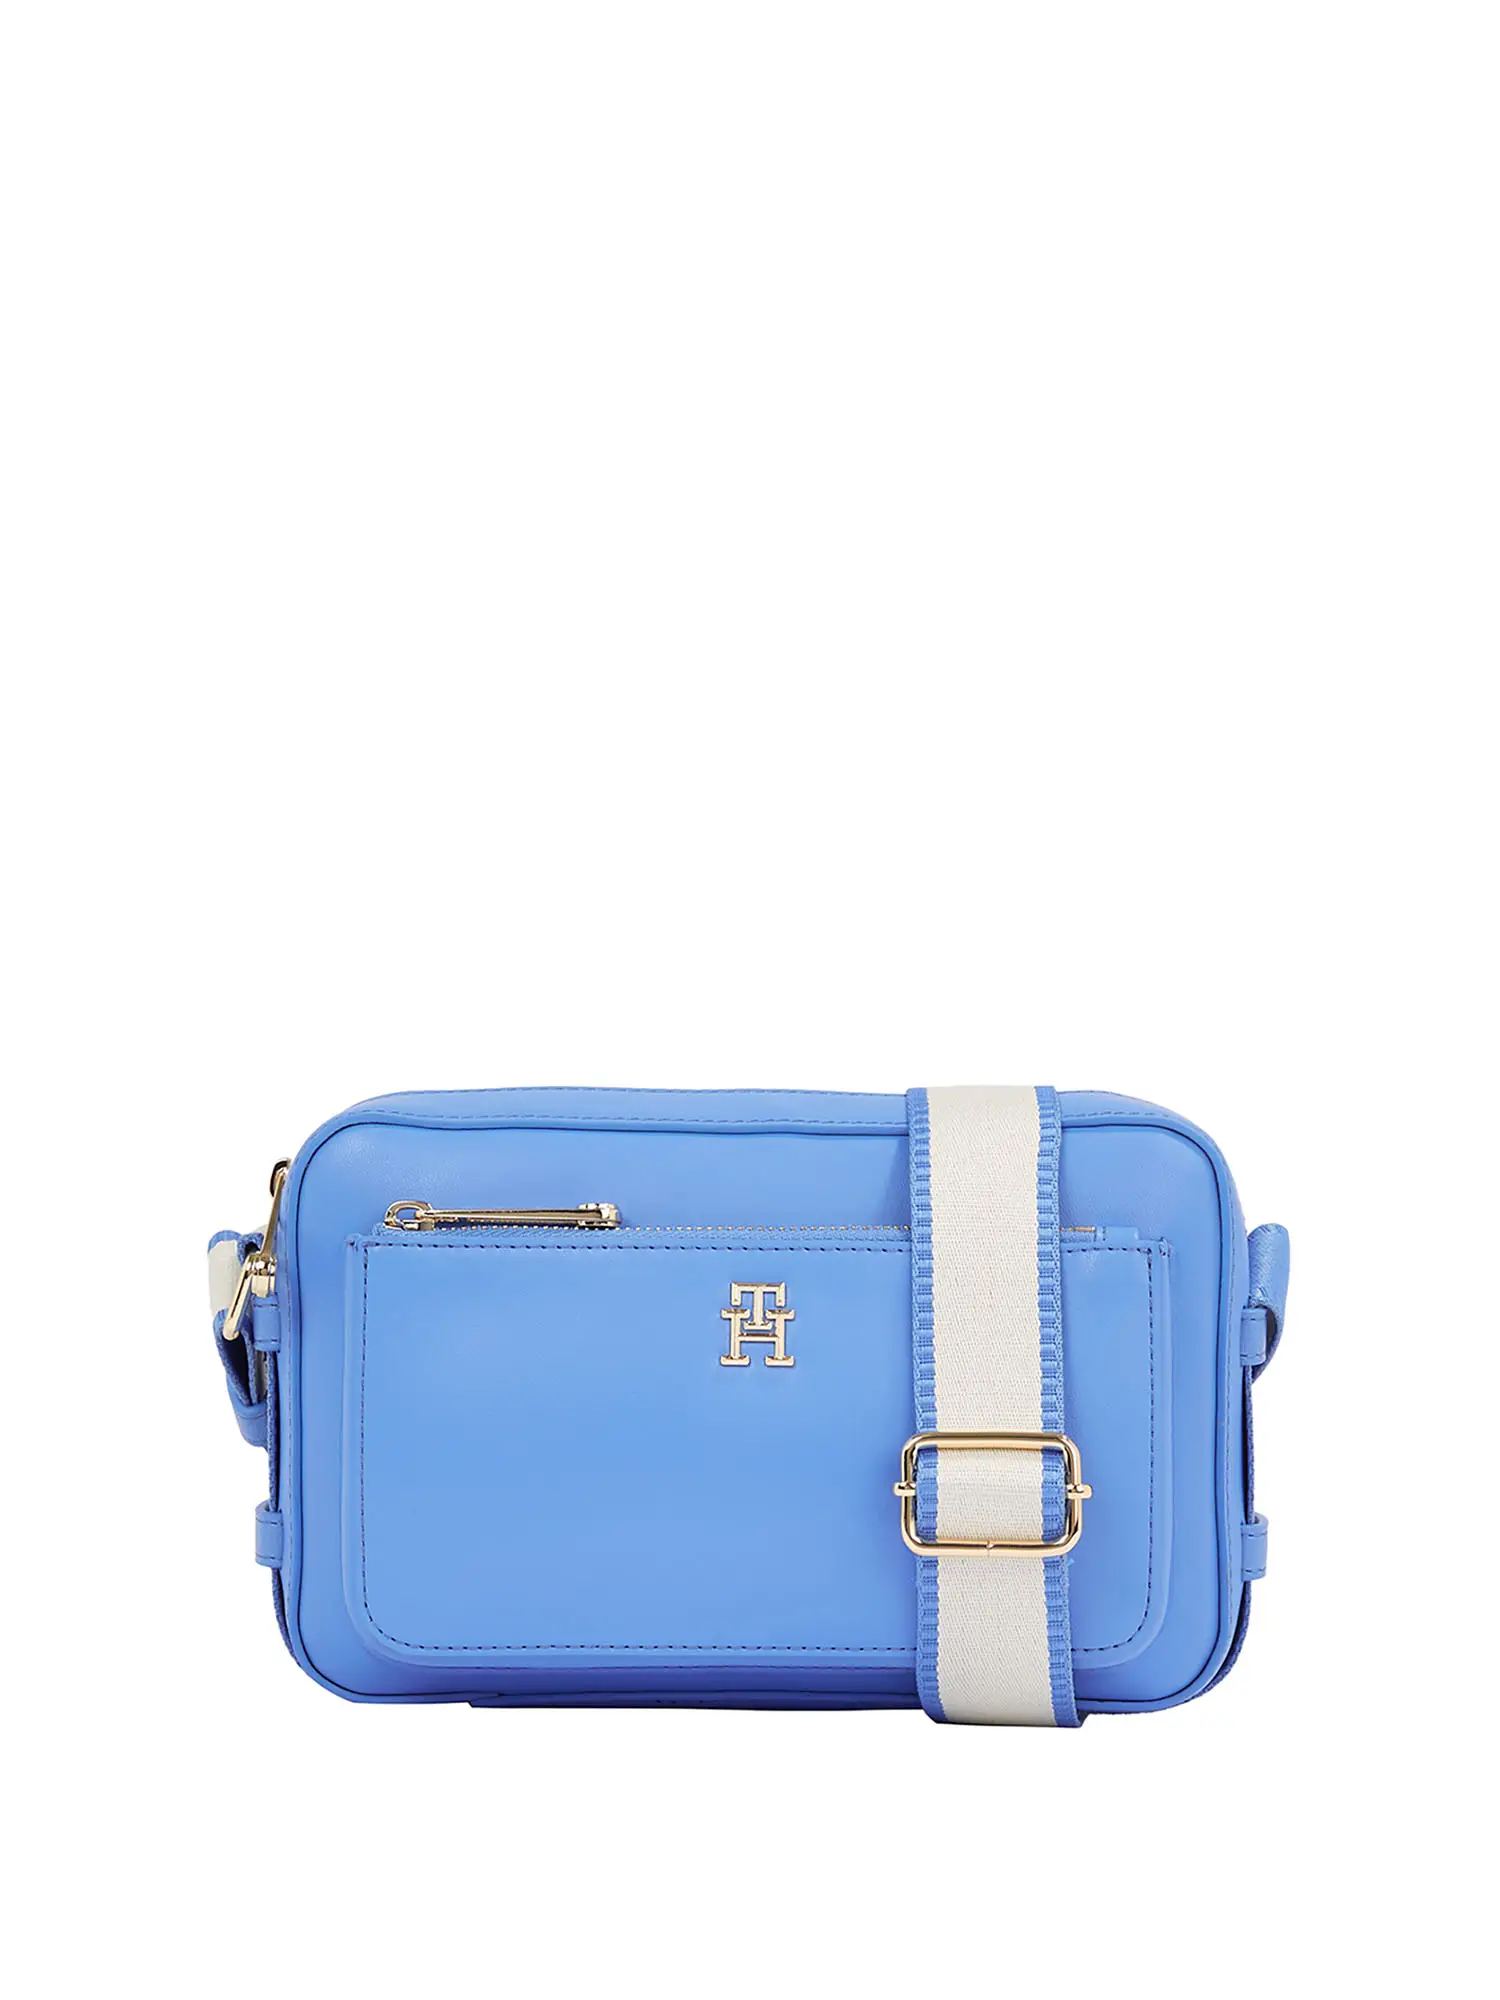 TRACOLLA DONNA - TOMMY HILFIGER - AW0AW15991 - BLU, UNICA